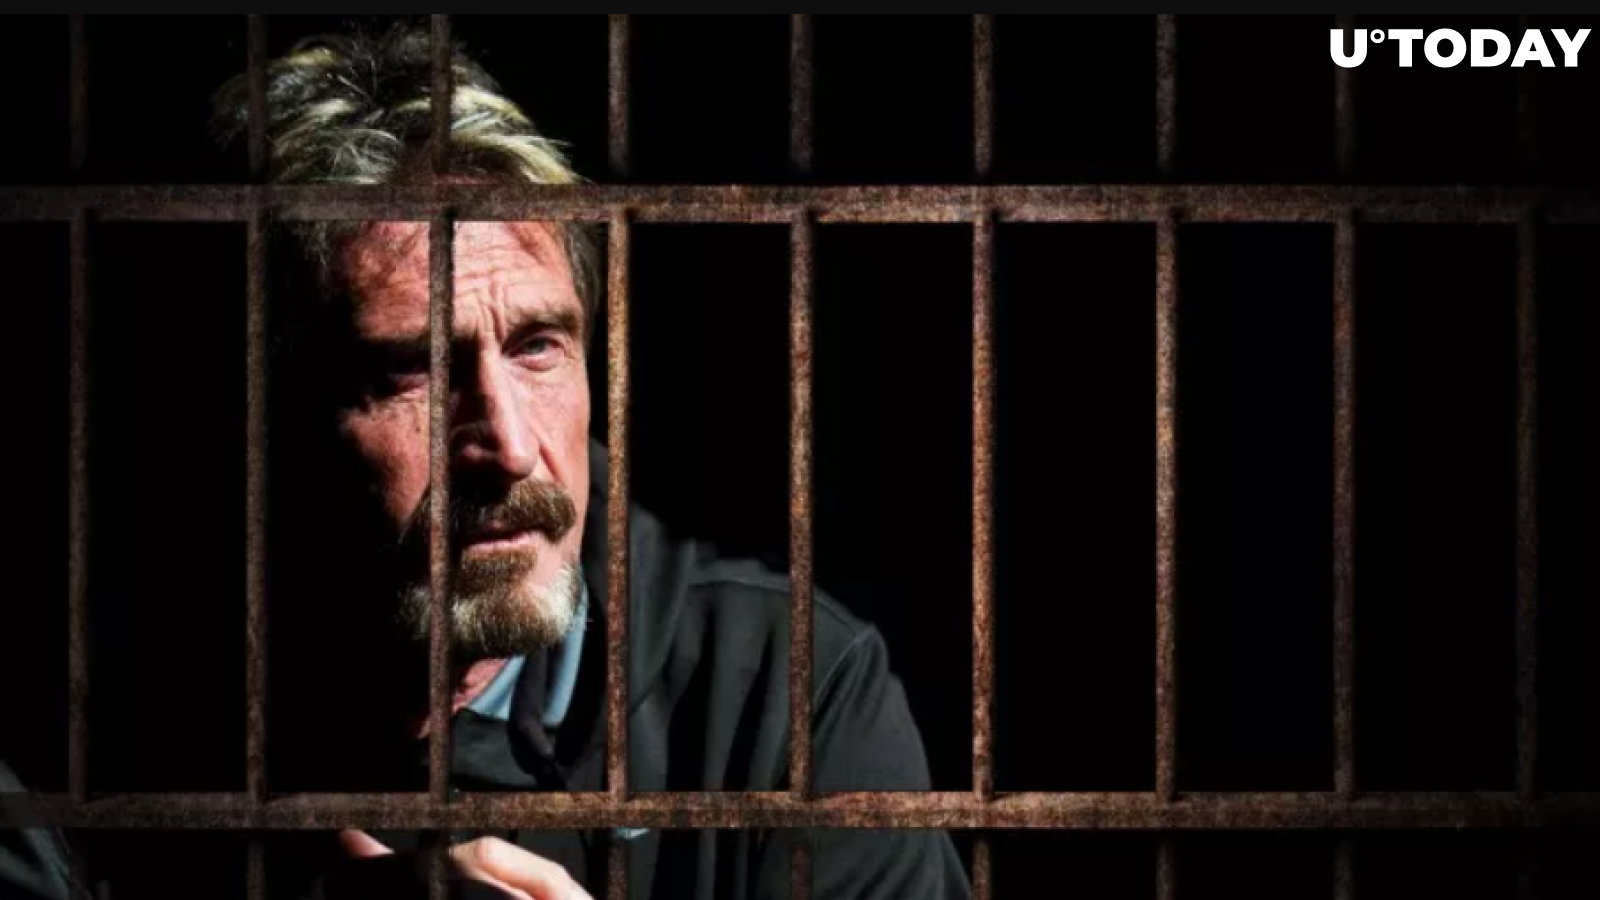 John McAfee Starts Tweeting from Prison, Brings Up Epstein Conspiracy